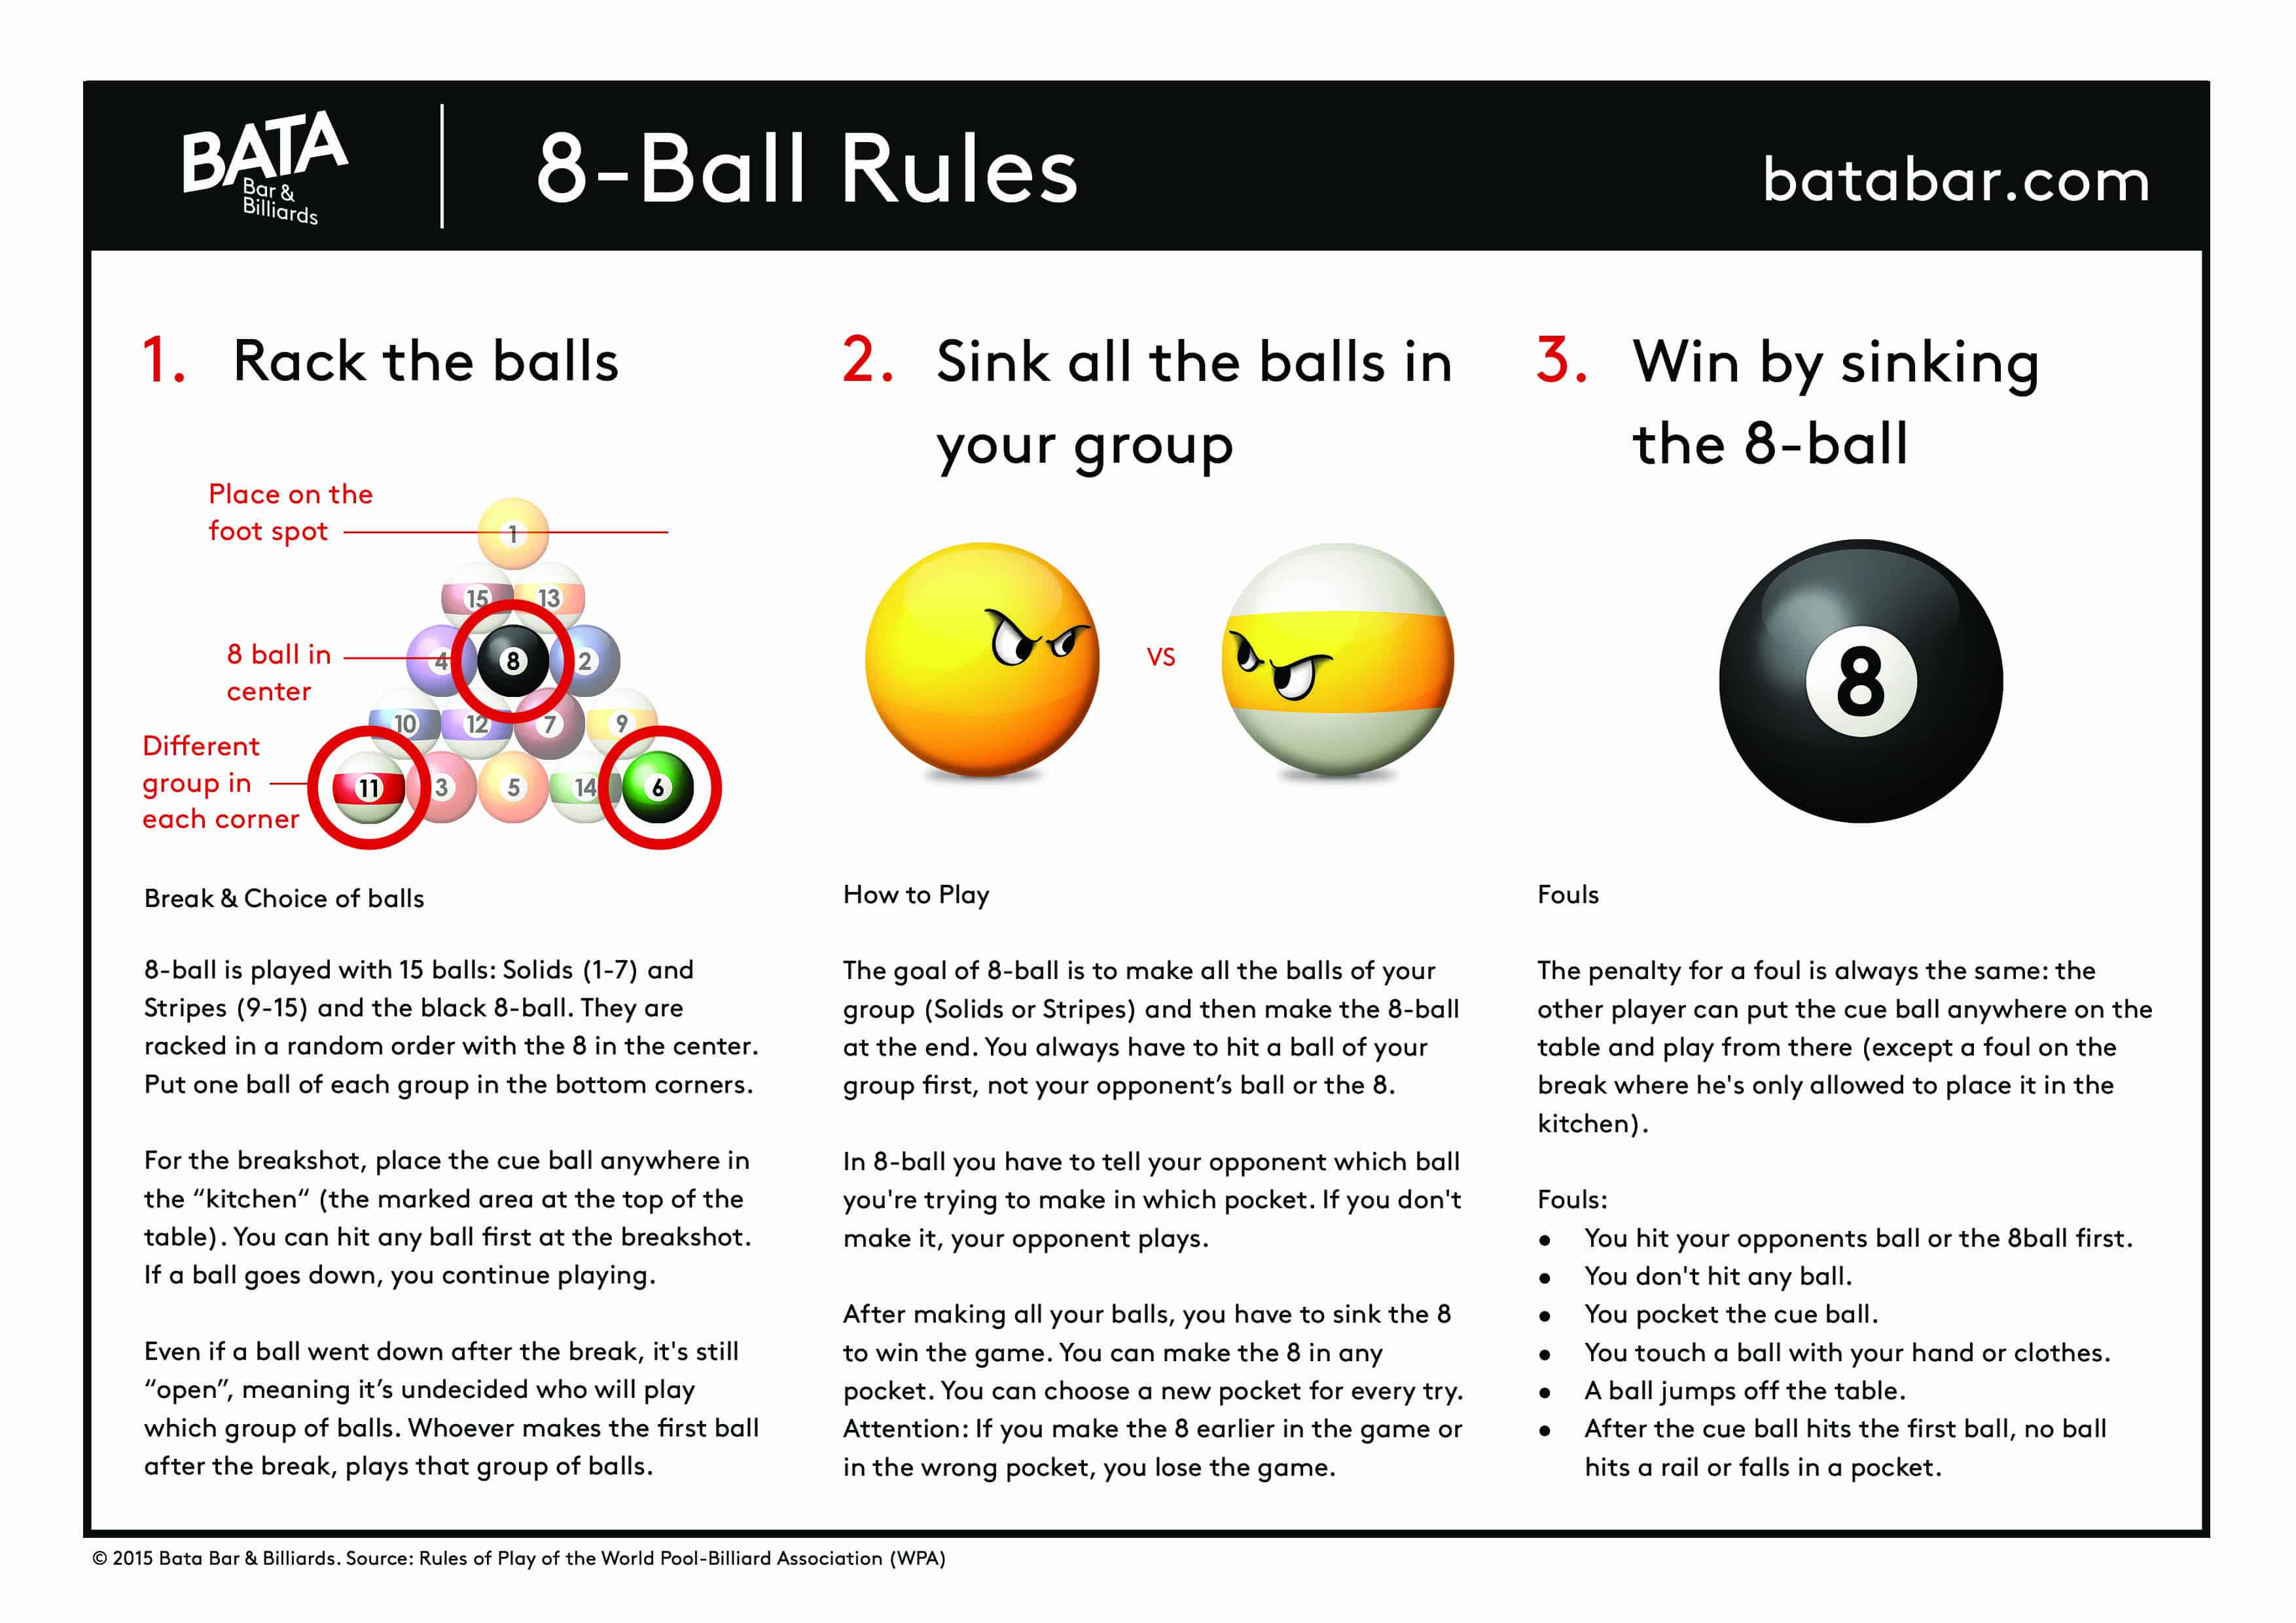 How to play 9 Ball (Billiards / Pool) 